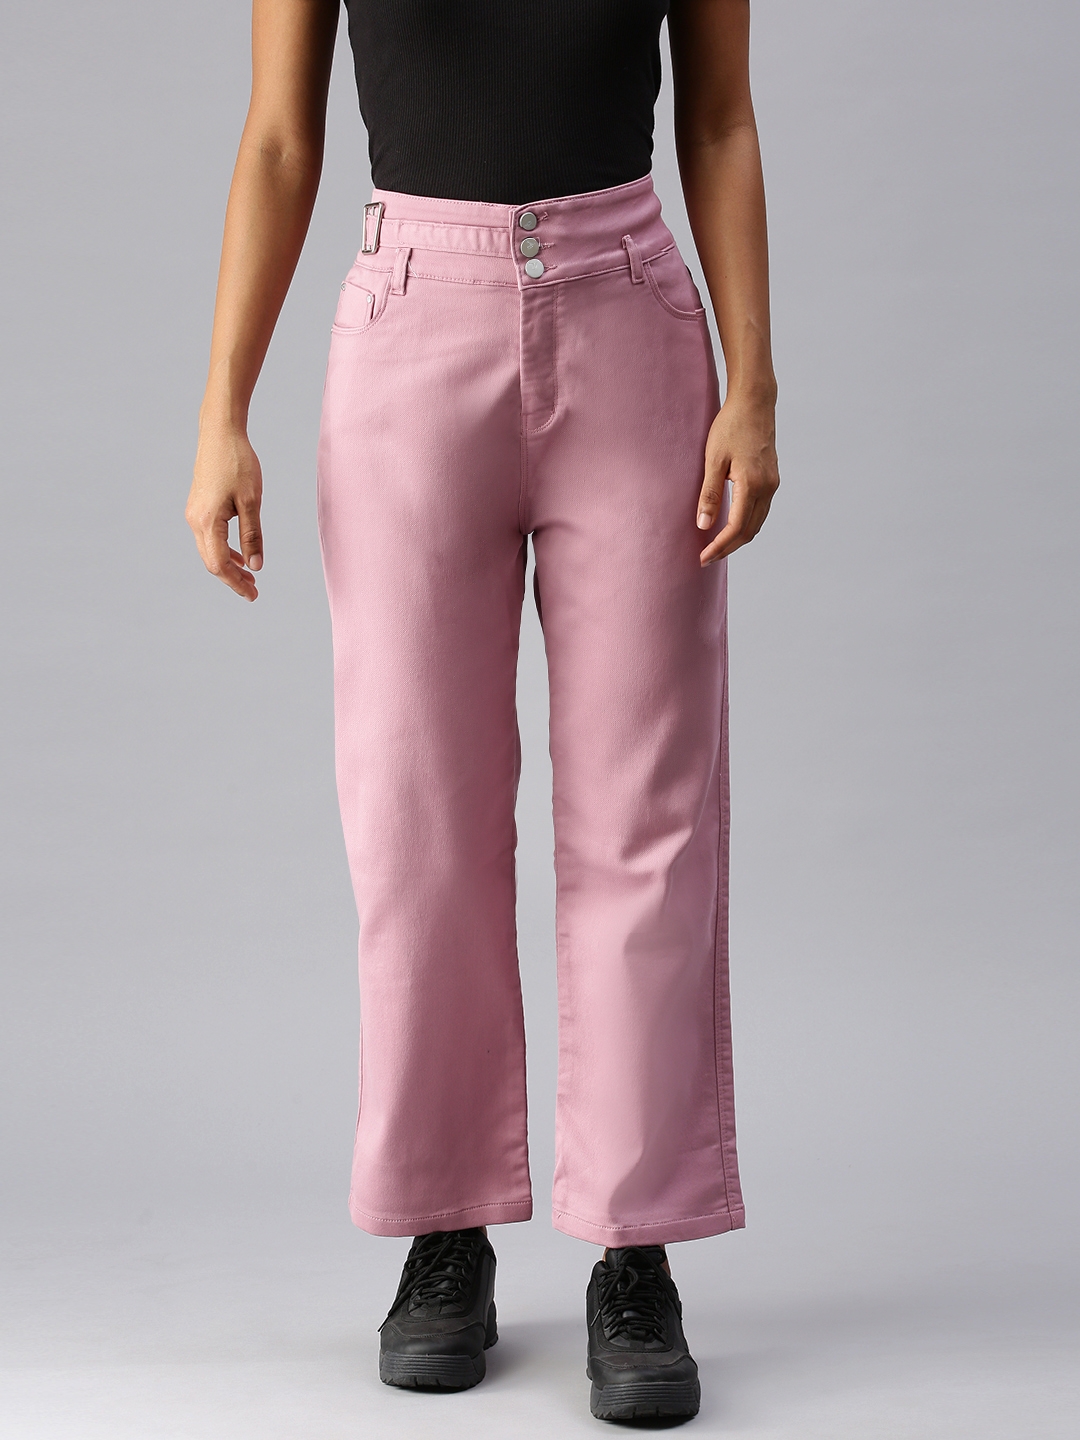 Showoff | SHOWOFF Women's Clean Look Pink Relaxed Fit Denim Jeans